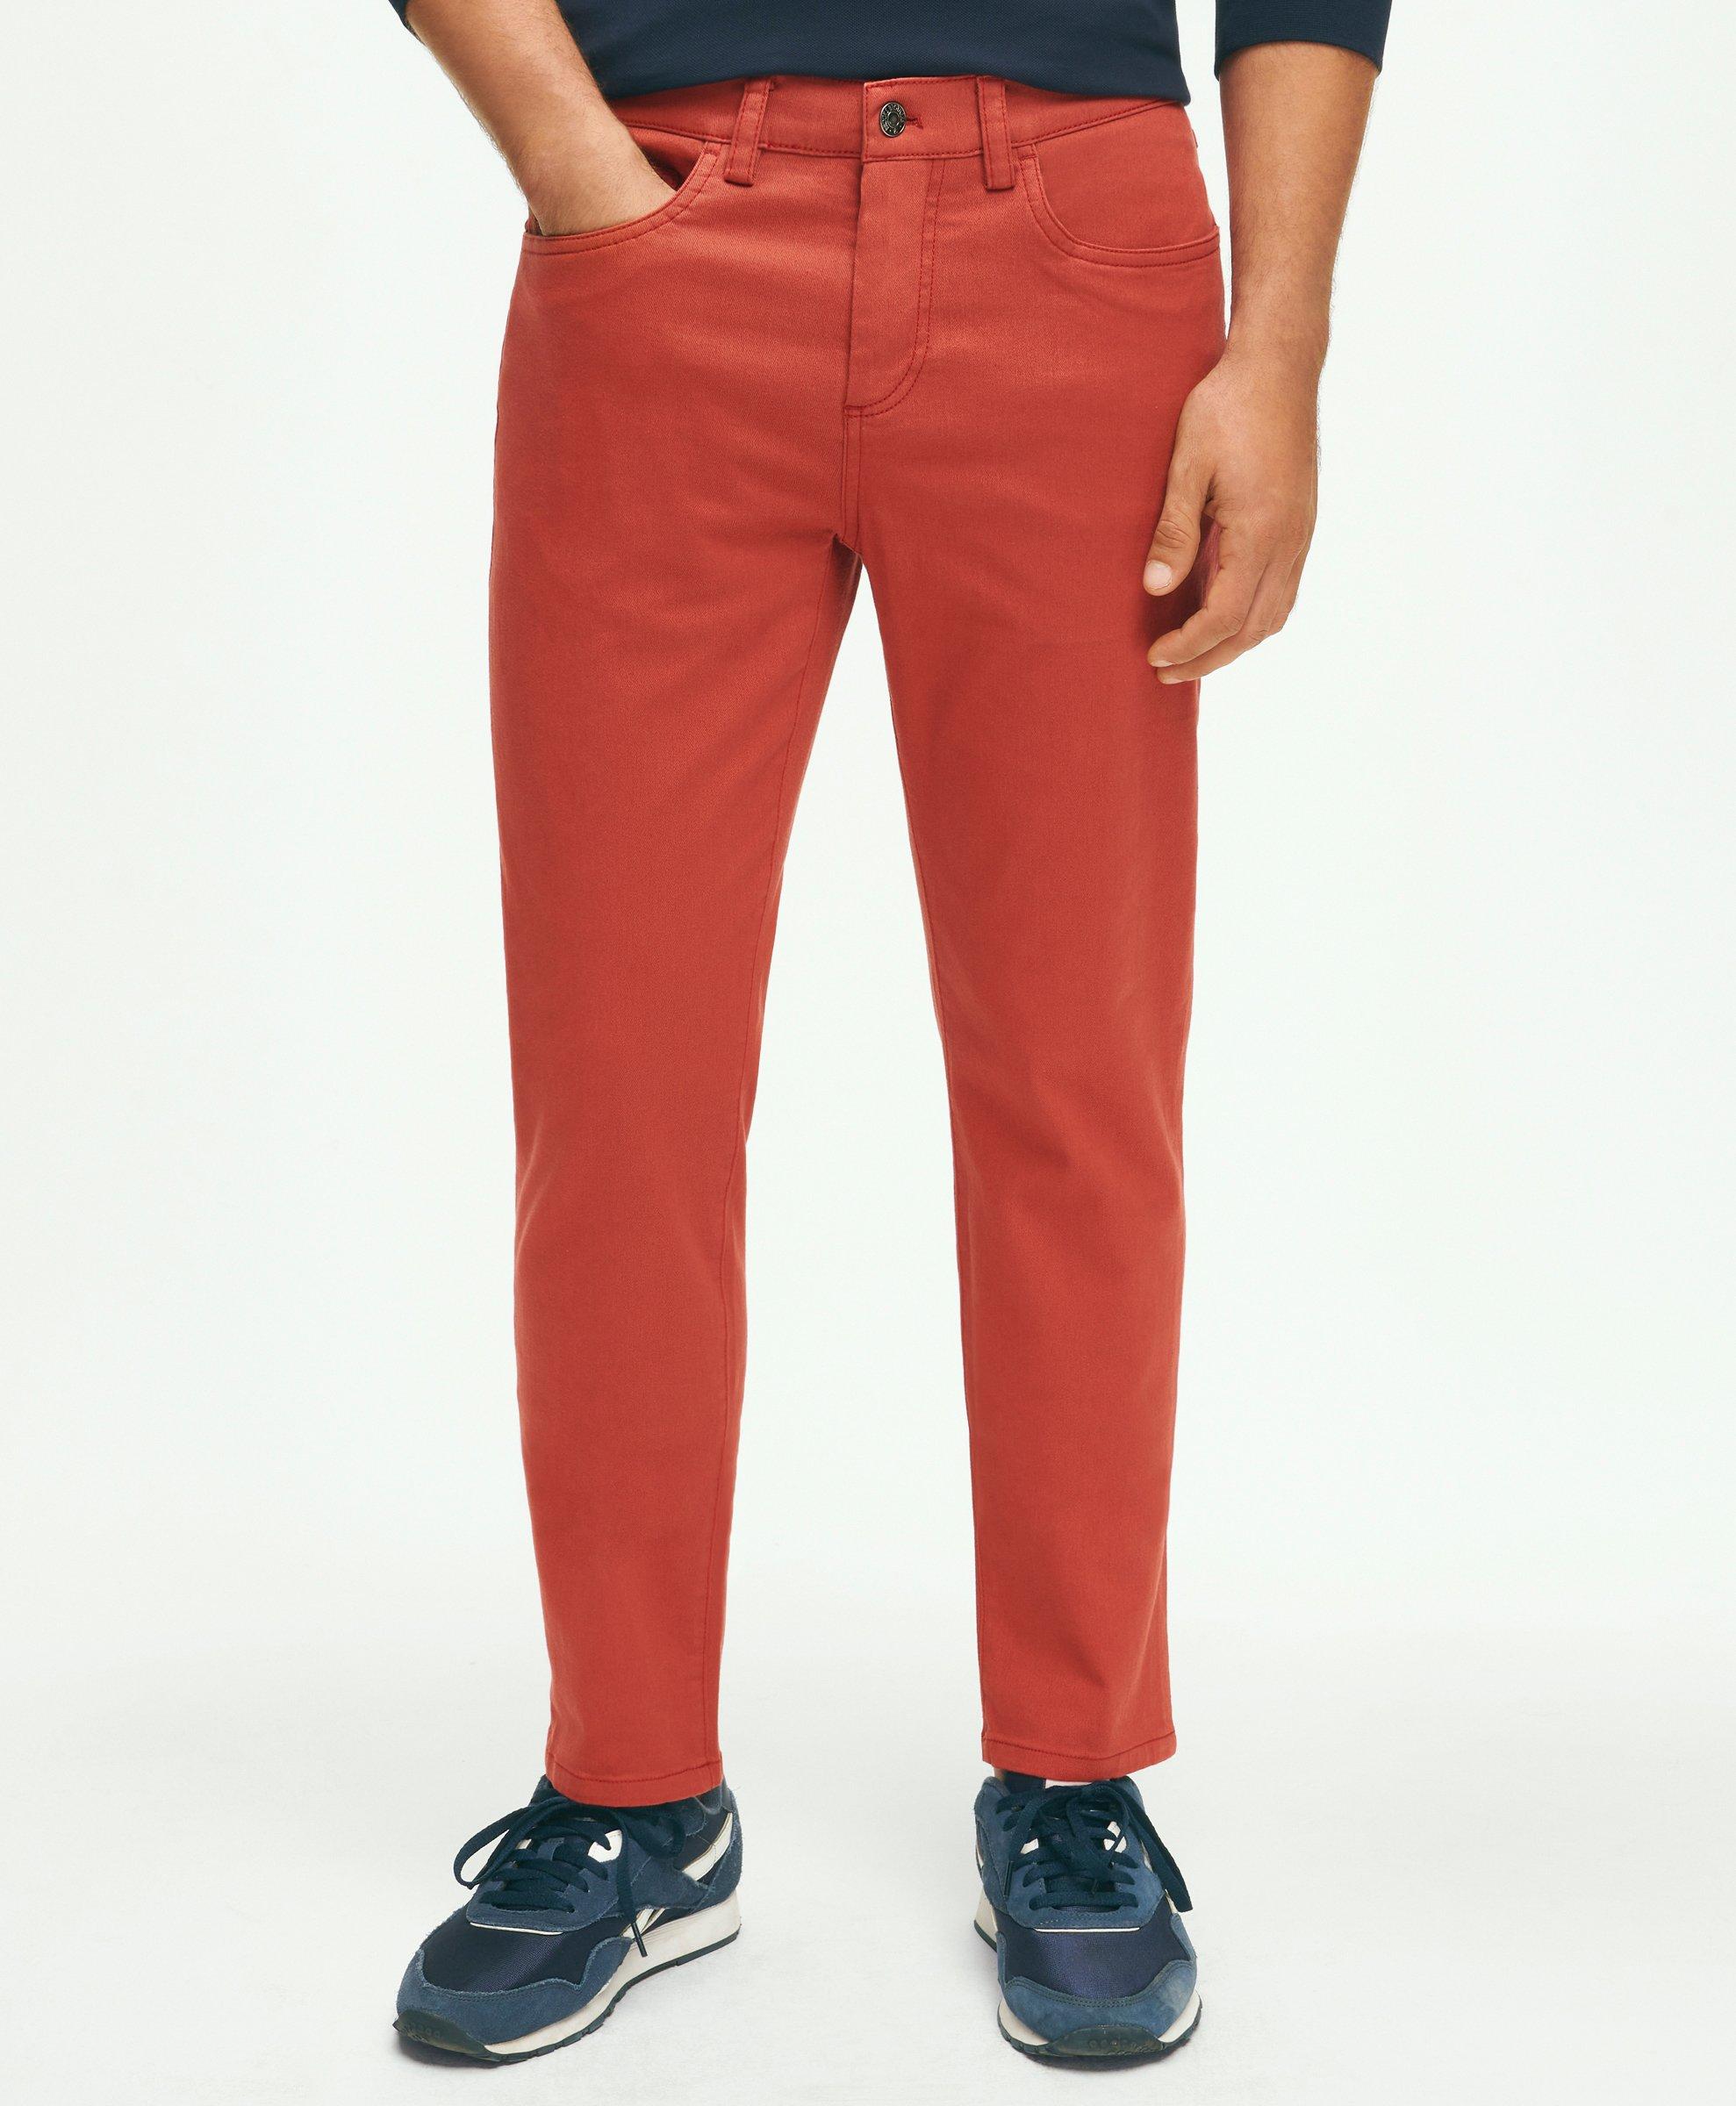 Shop Brooks Brothers The 5-pocket Twill Pants | Red | Size 38 32